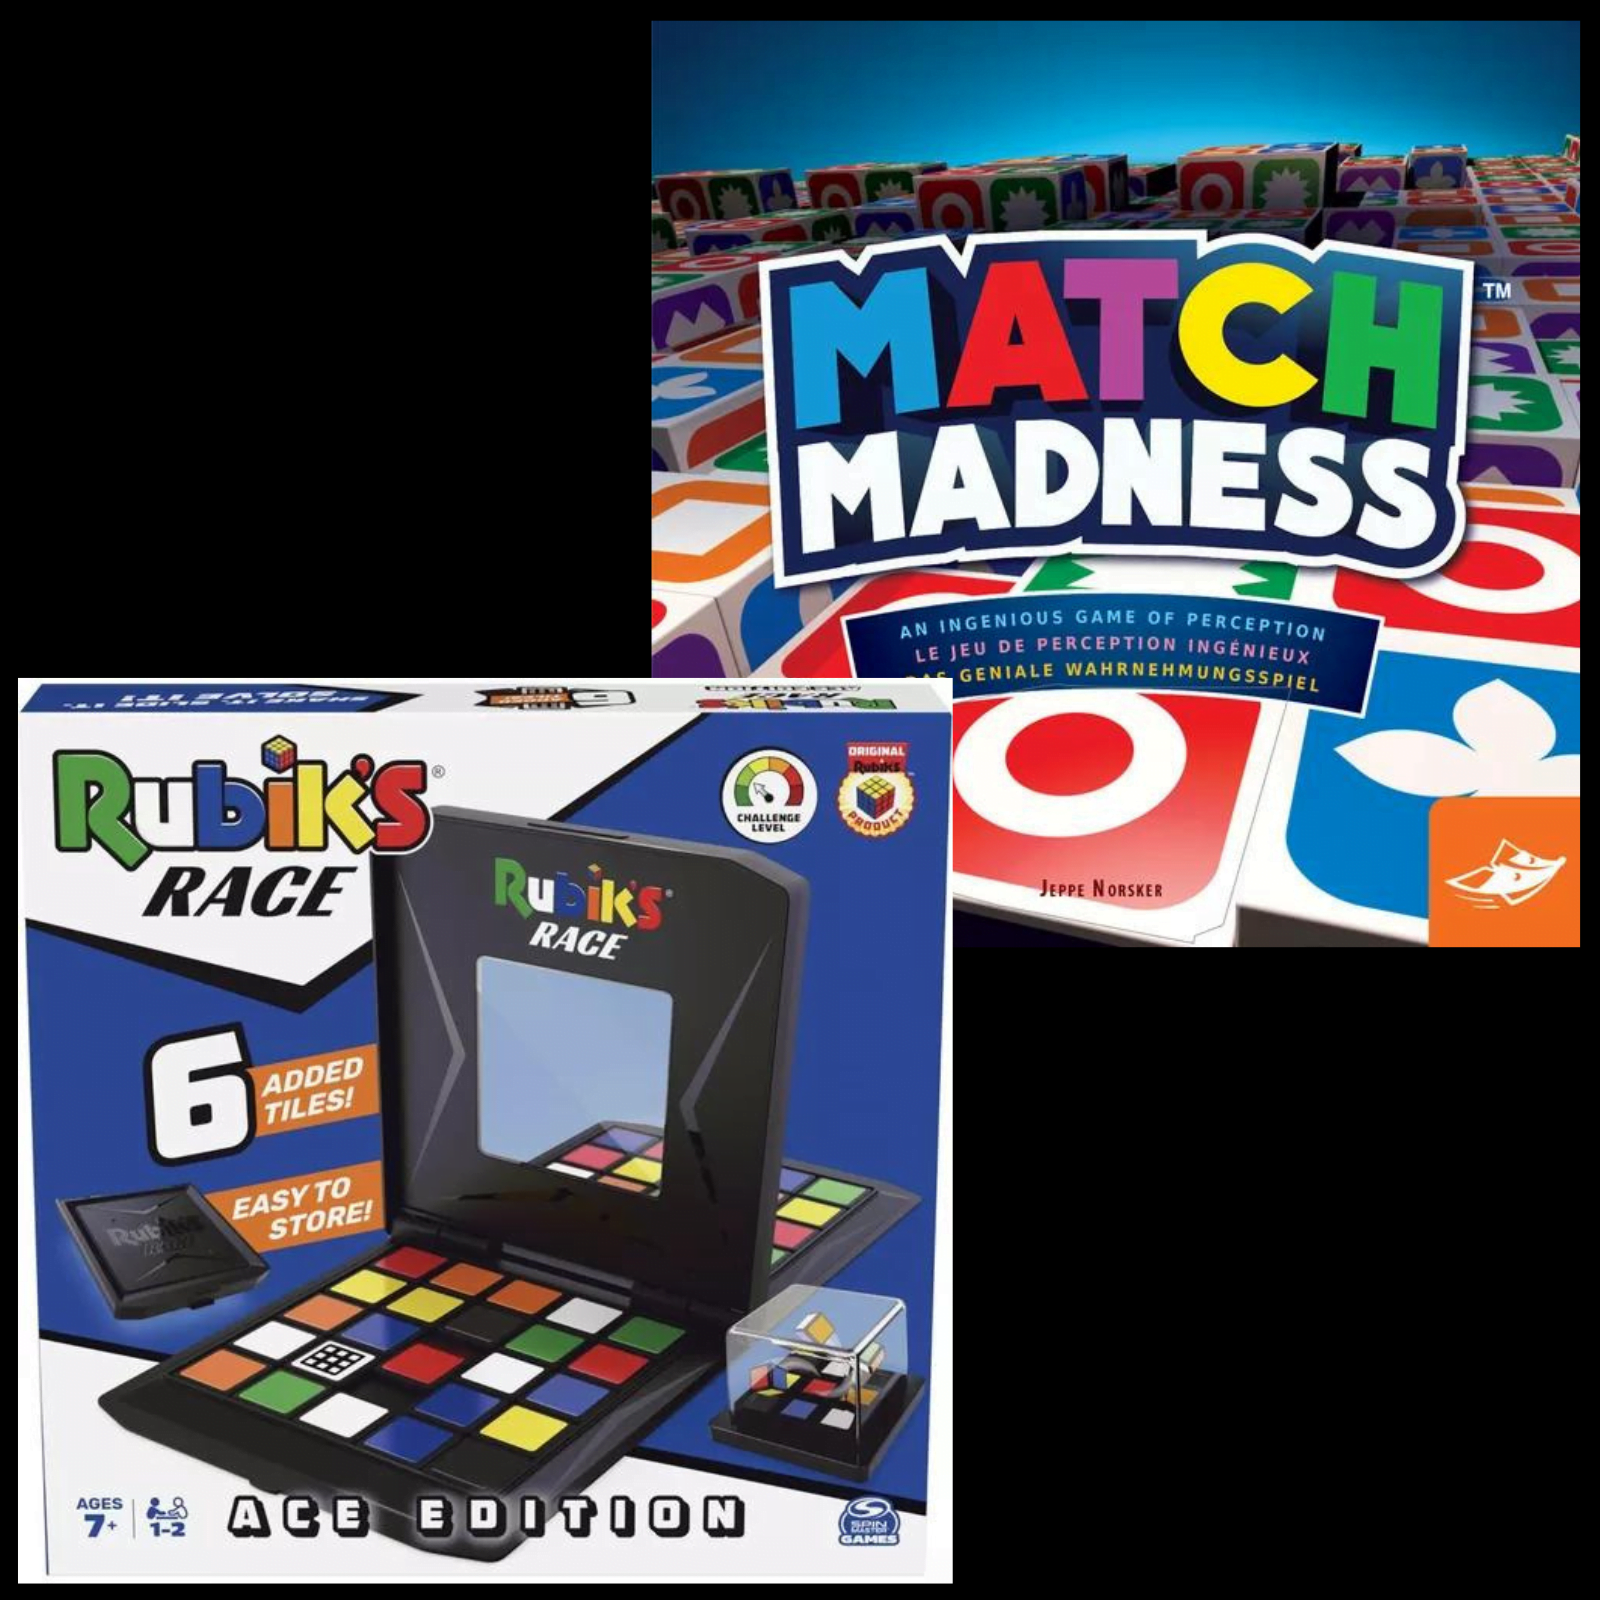 Rubik’s Race & Match Madness – A Kid’s Table Review